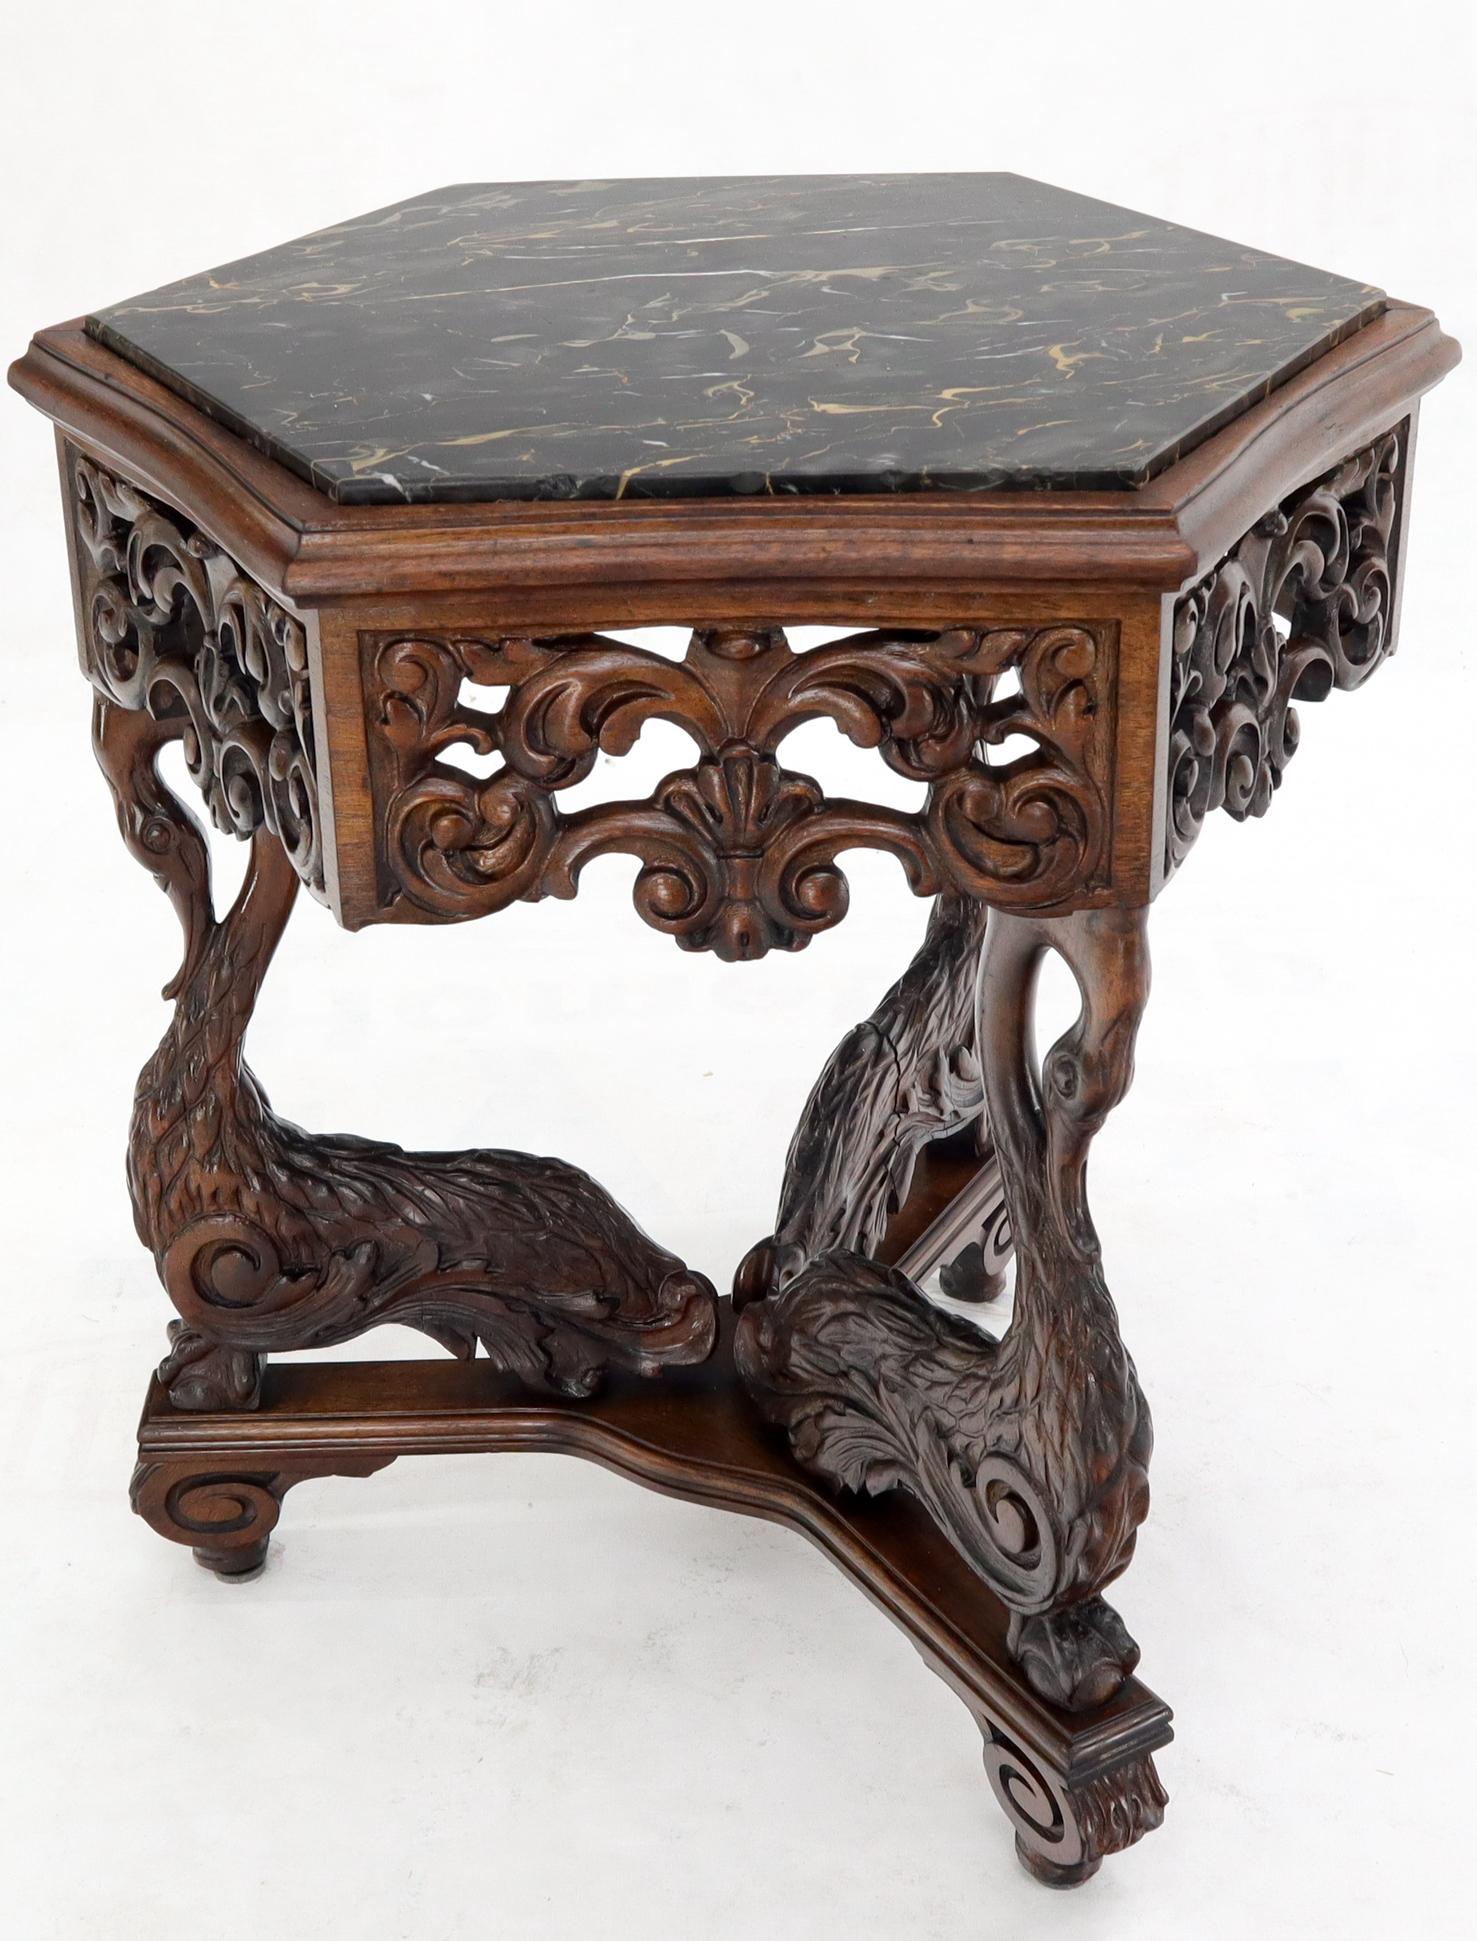 Heavily carved walnut hexagon shape marble-top lamp side table stand pedestal.